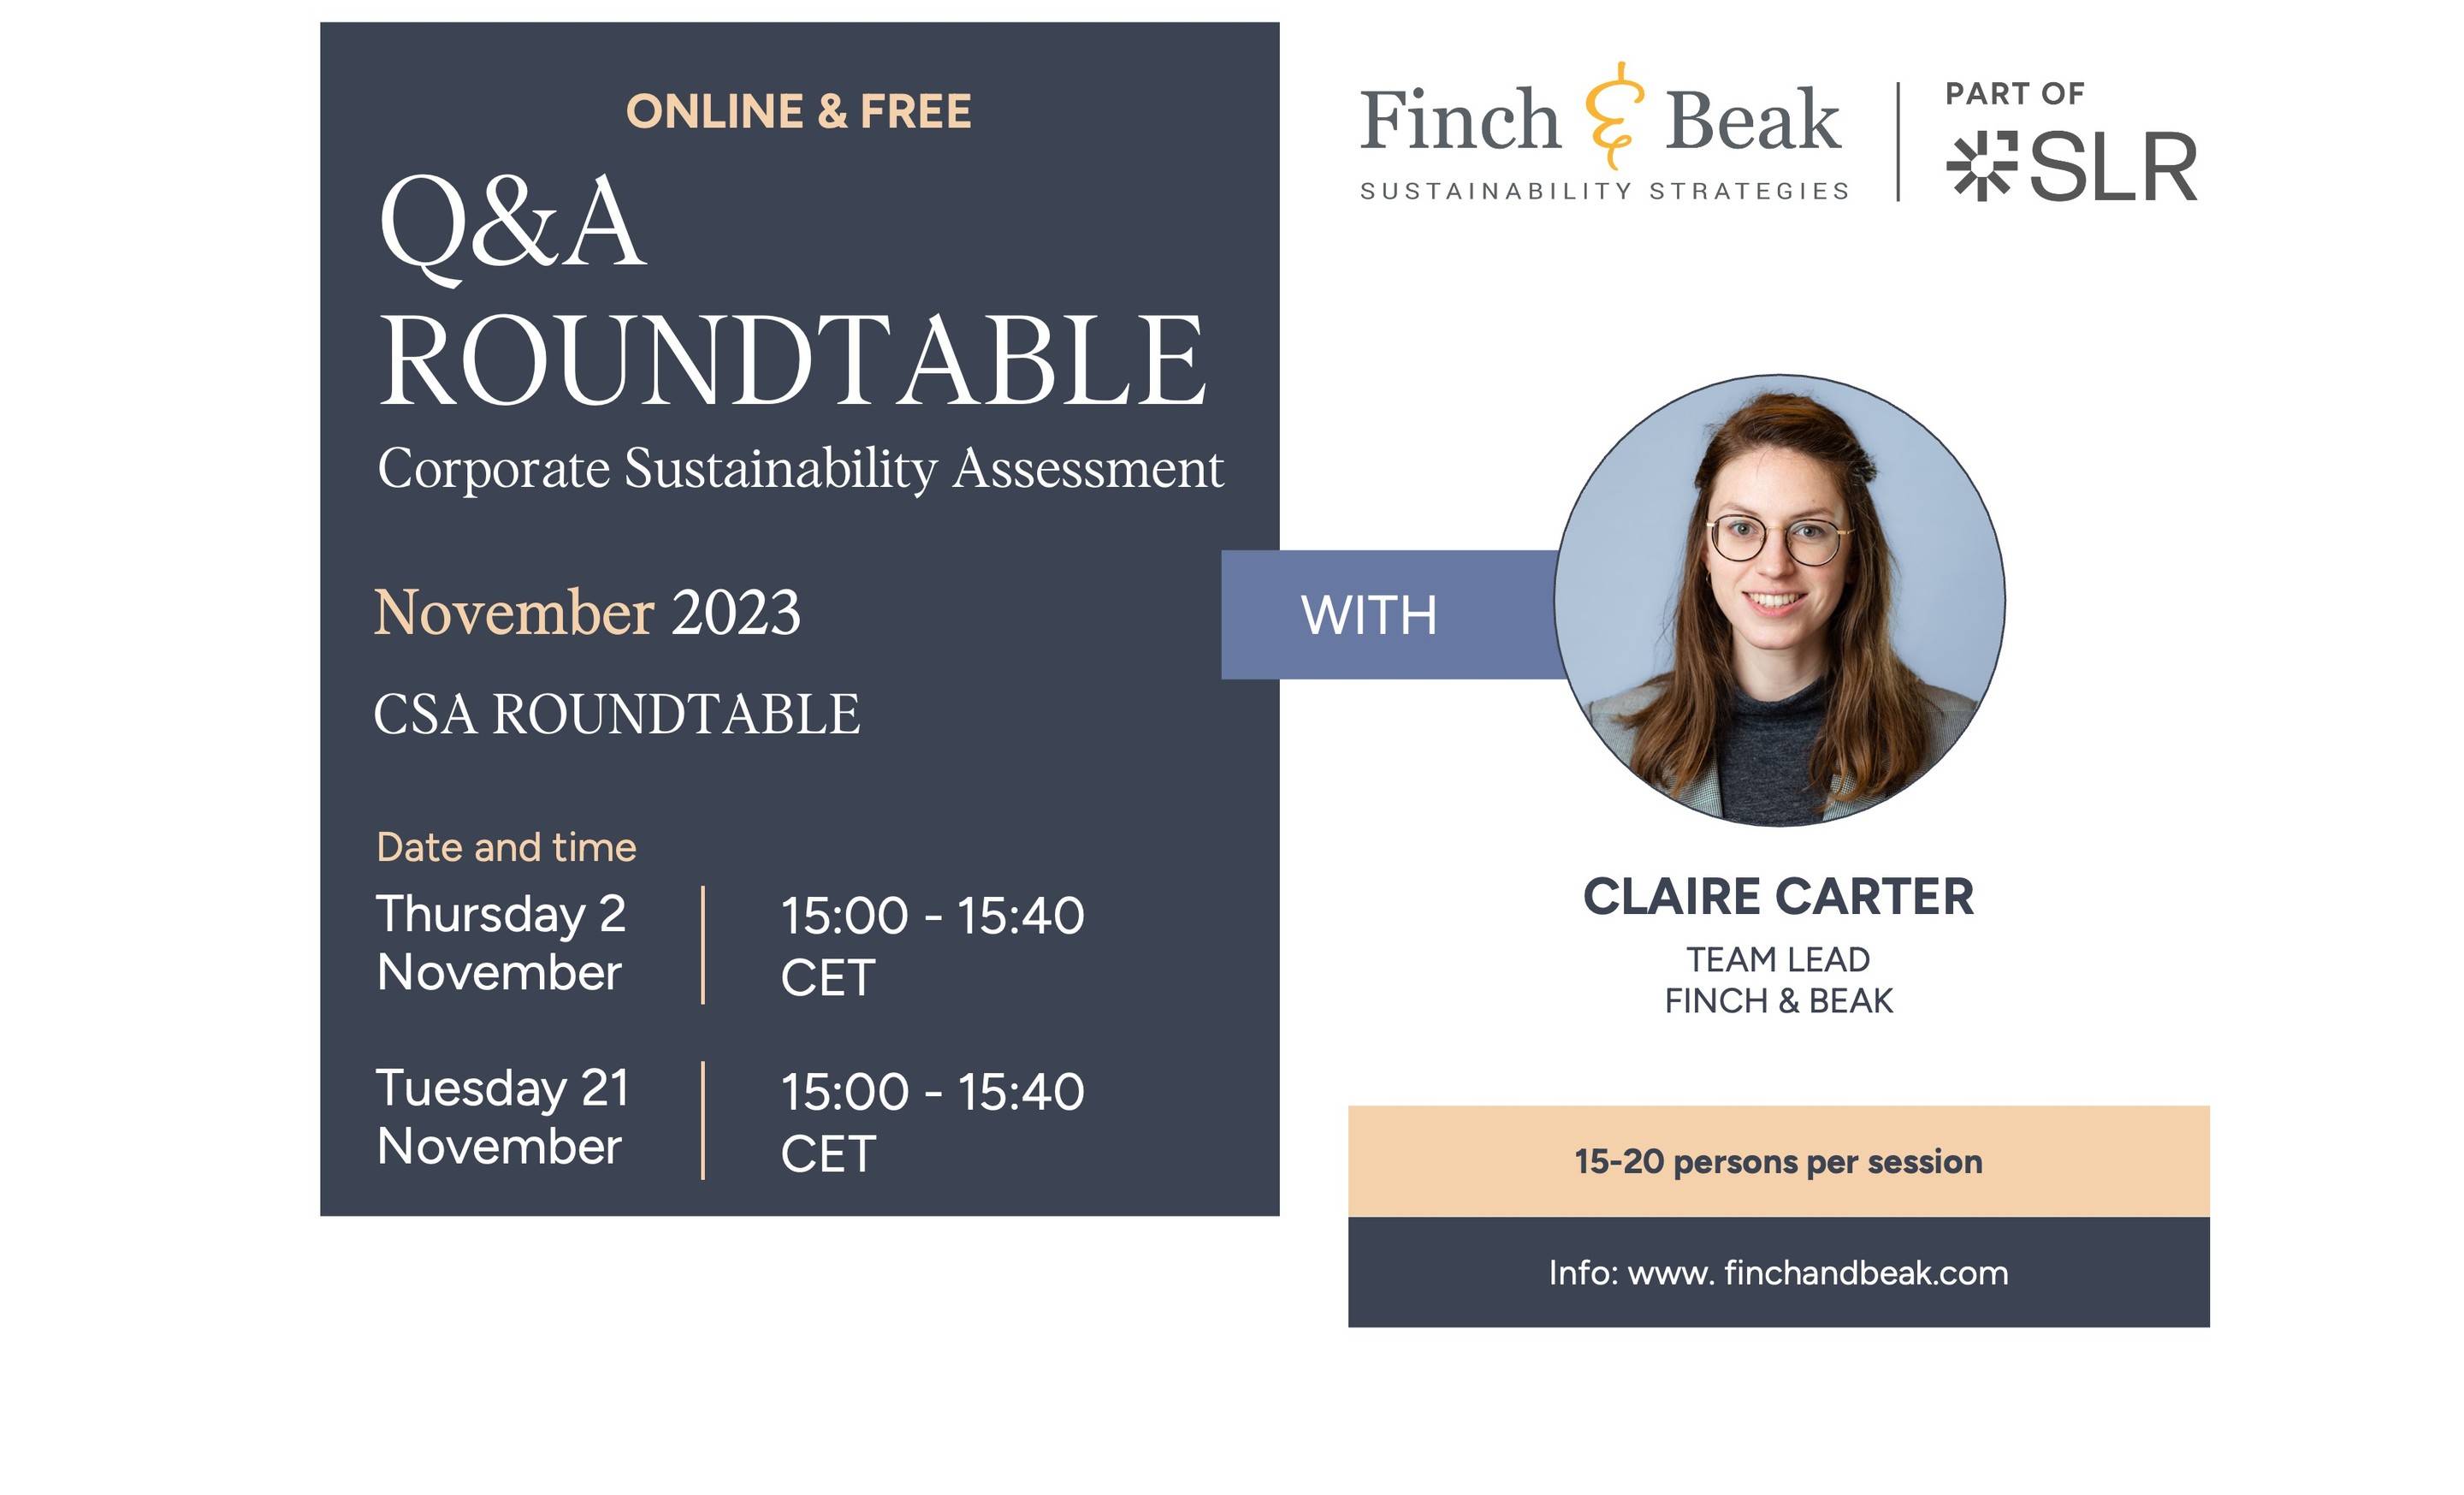 Join our CSA Roundtable!